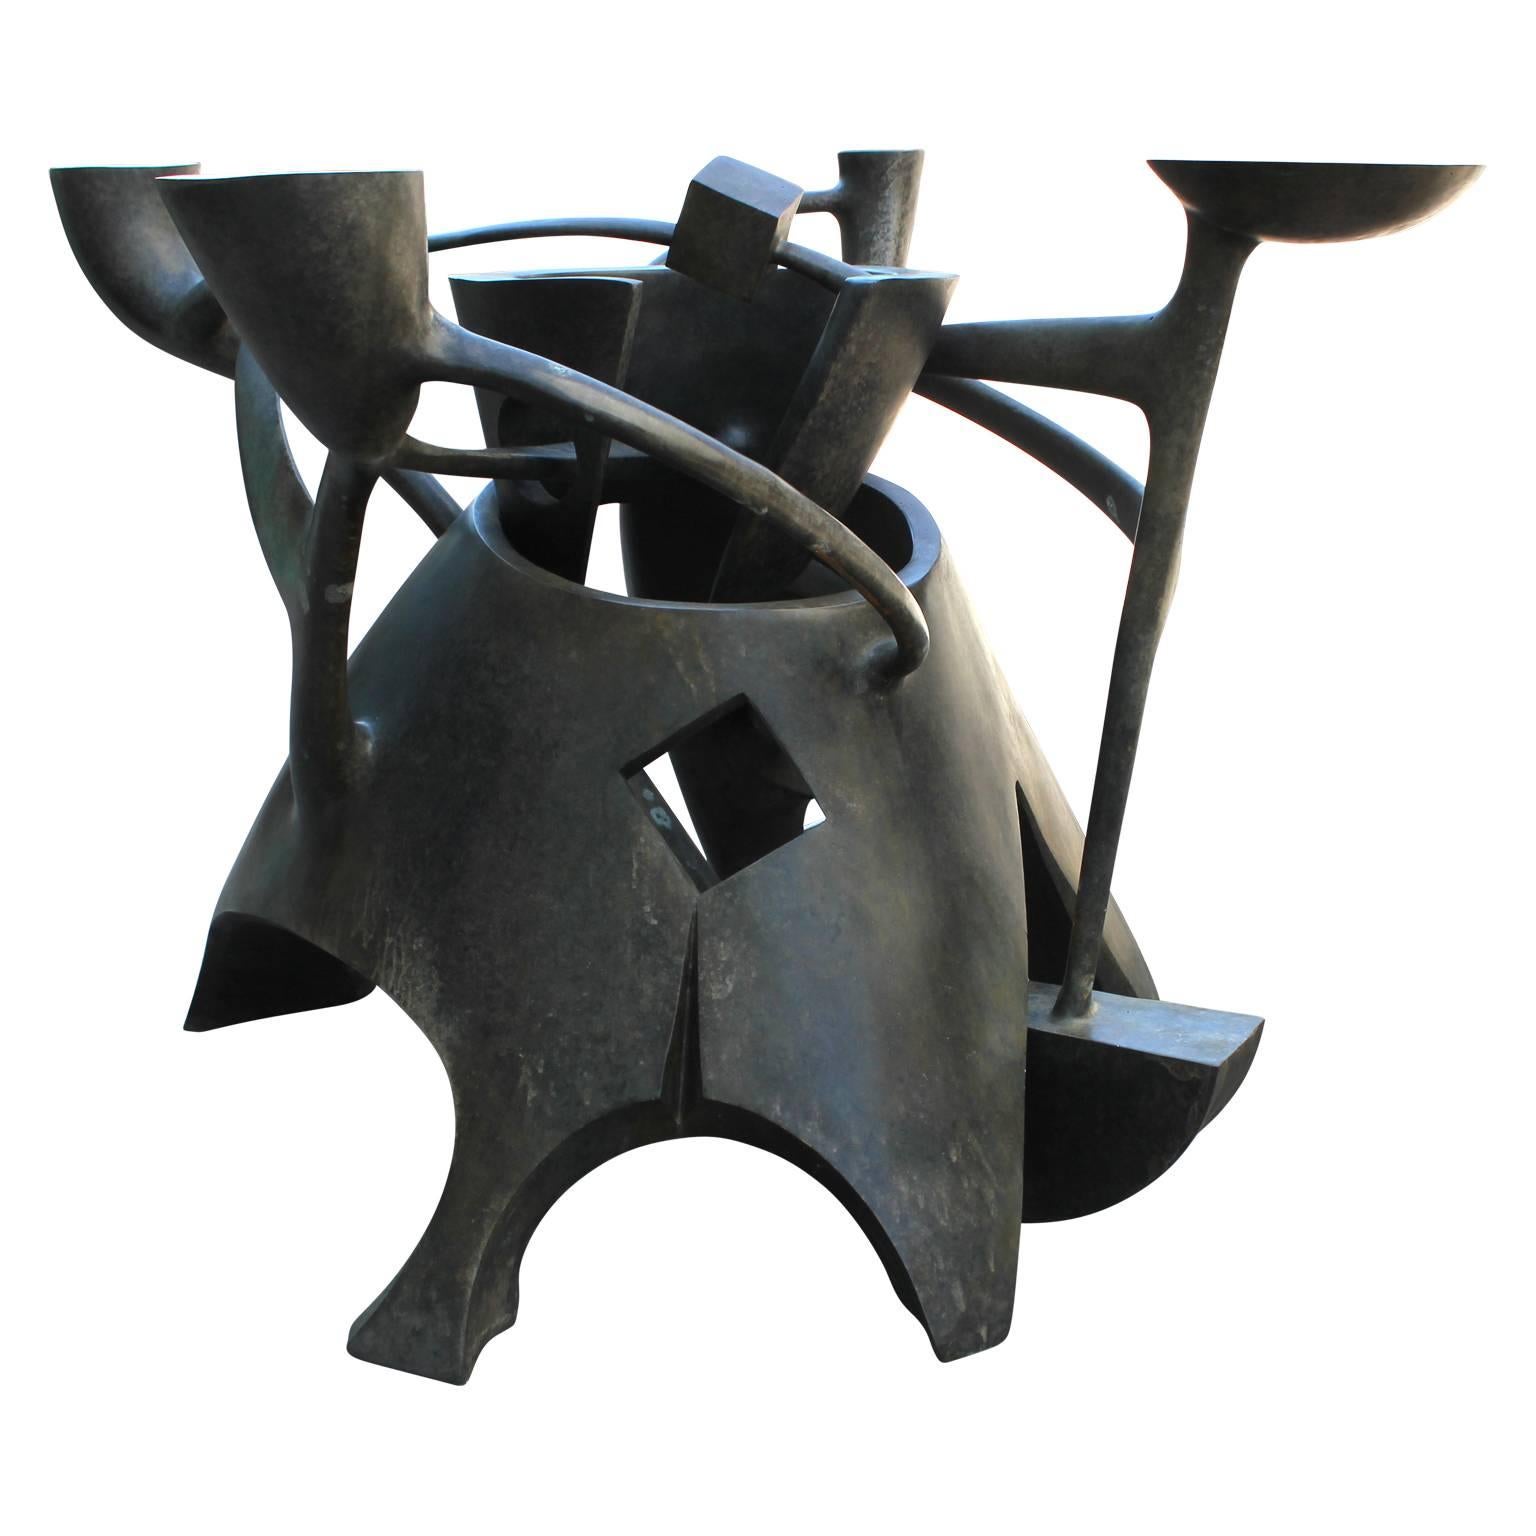 Sculptural bronze dining table by artist Gil Bruvel titled 